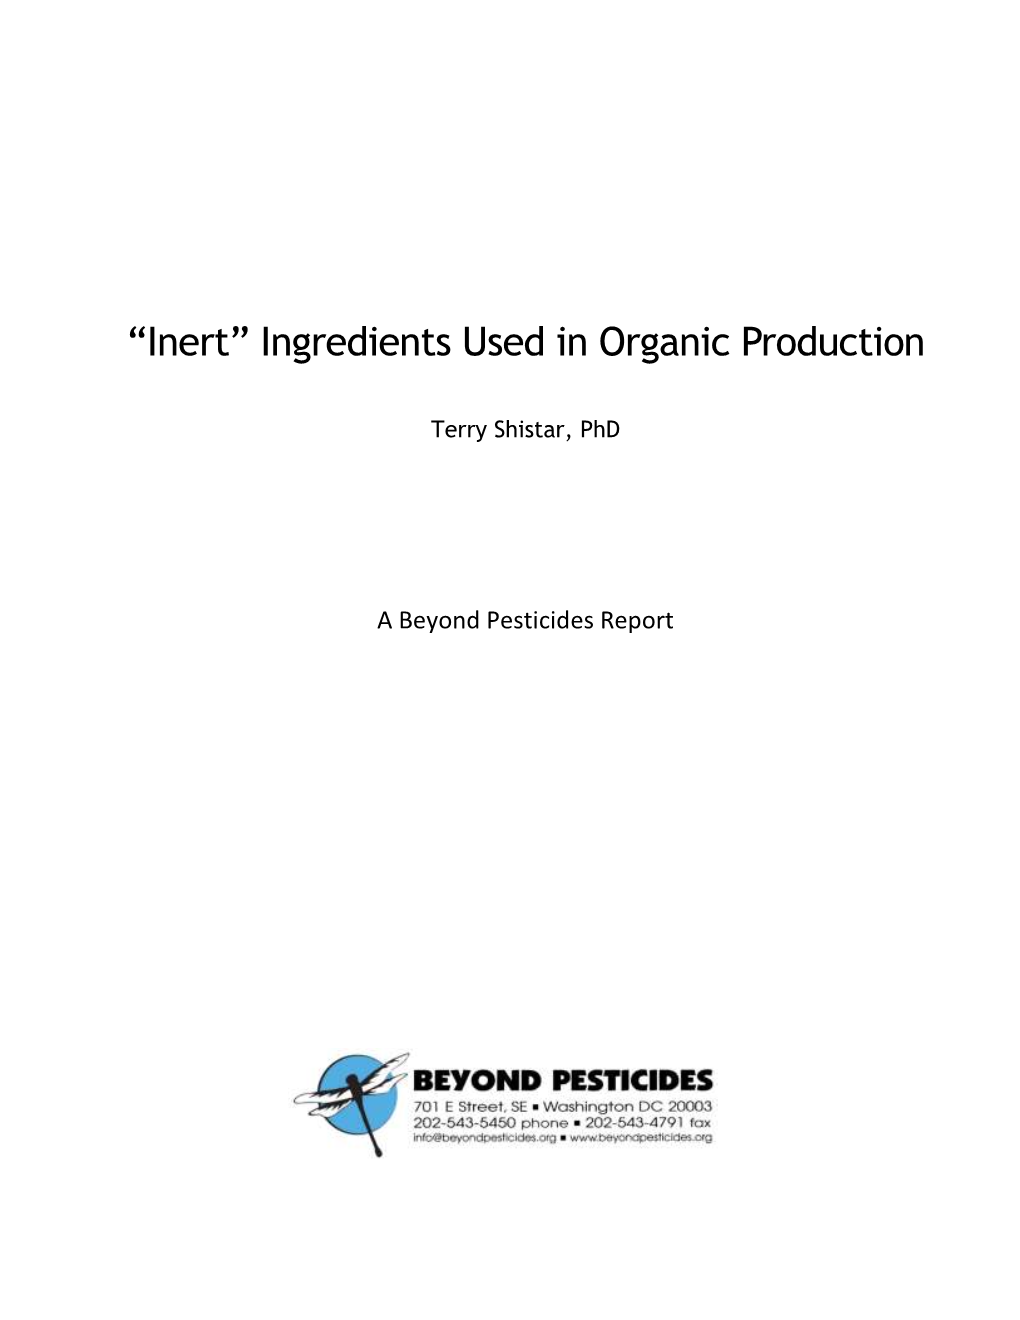 “Inert” Ingredients Used in Organic Production